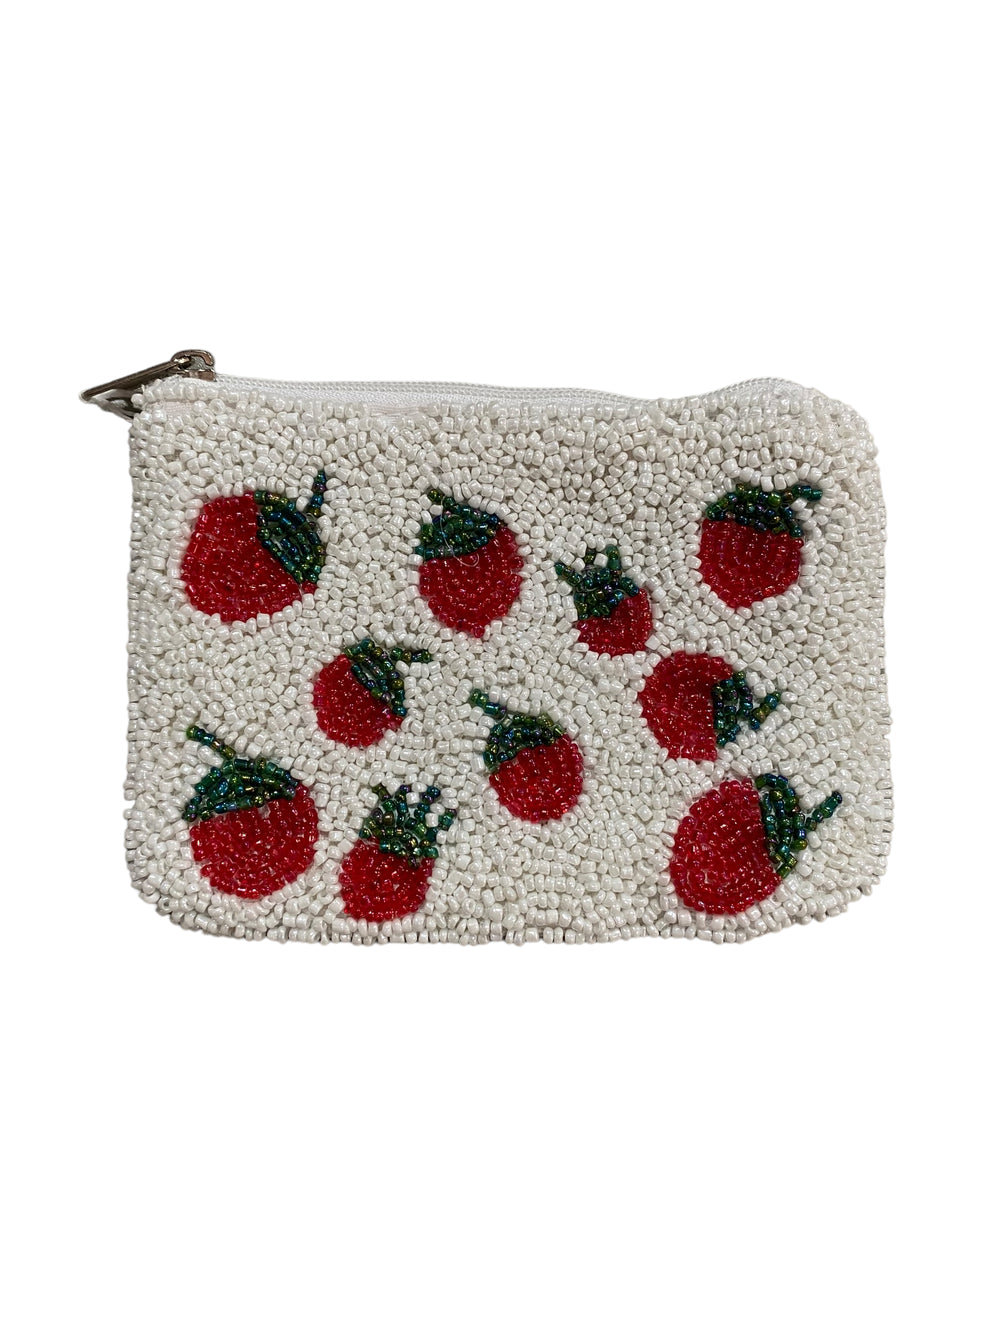 BEADED COIN PURSE-MISC - Kingfisher Road - Online Boutique